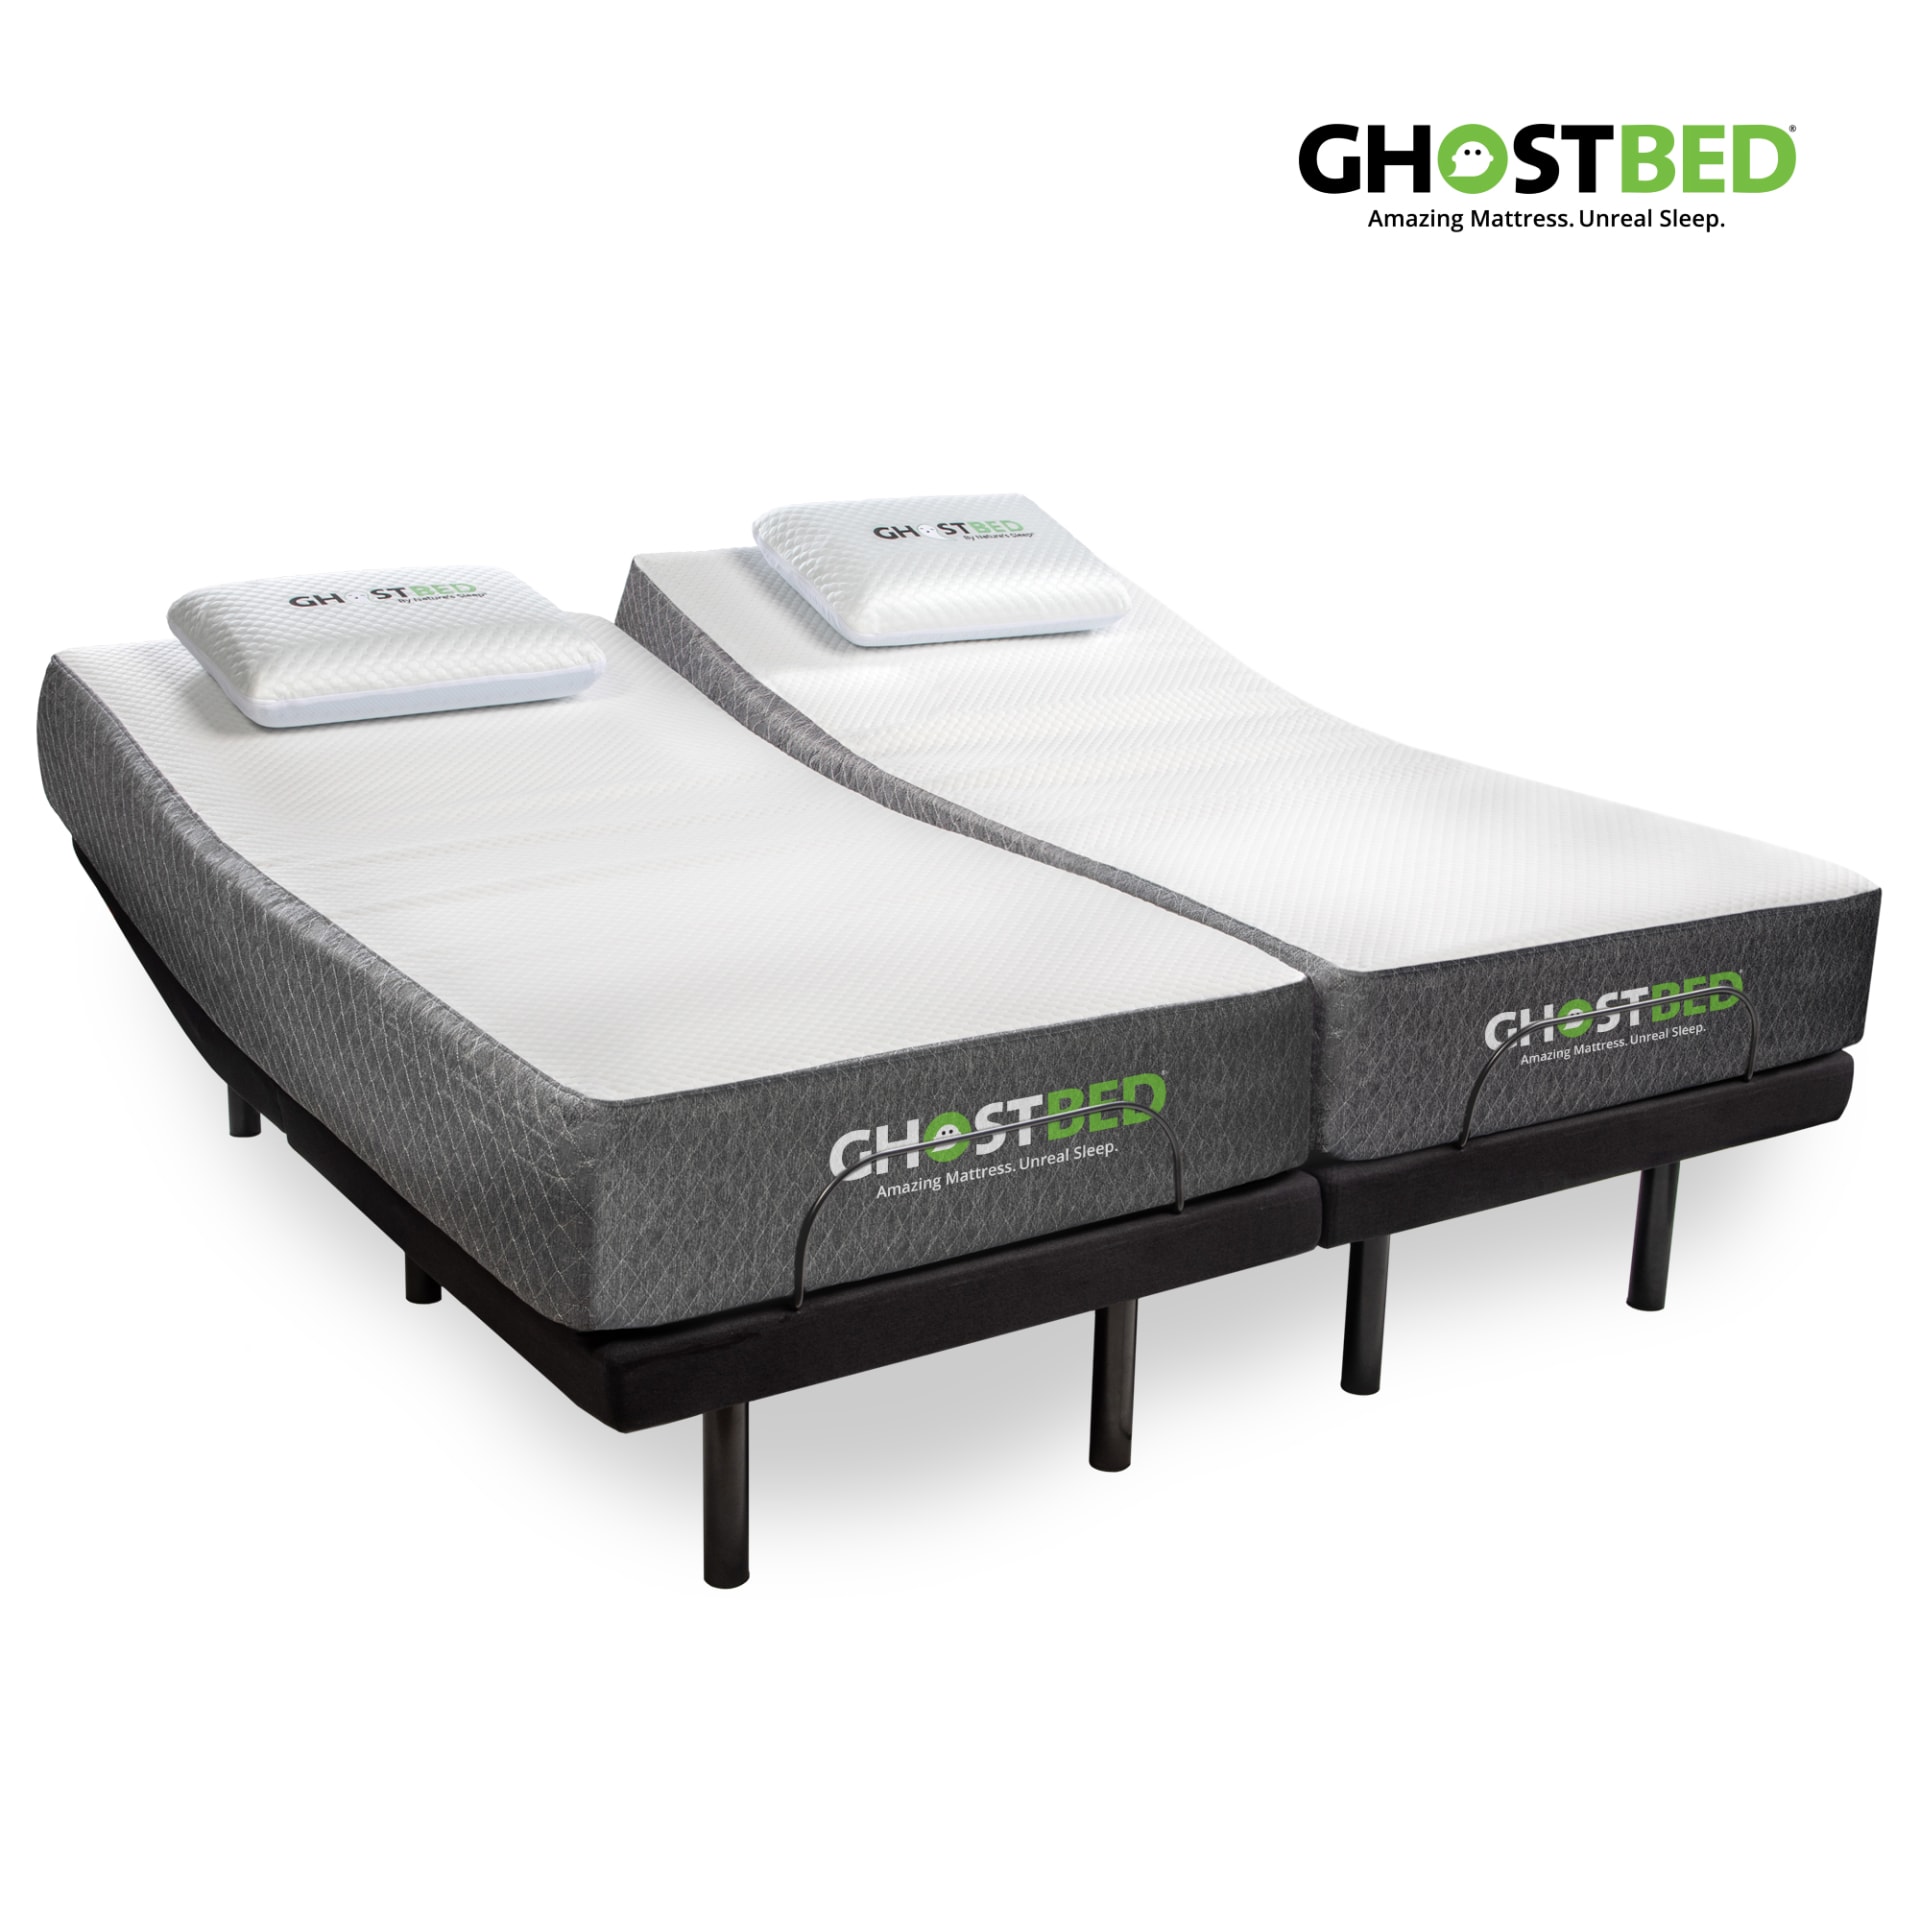 Ghostbed 11 Memory Foam Mattress With, Queen Adjustable Bed Frame With Remote